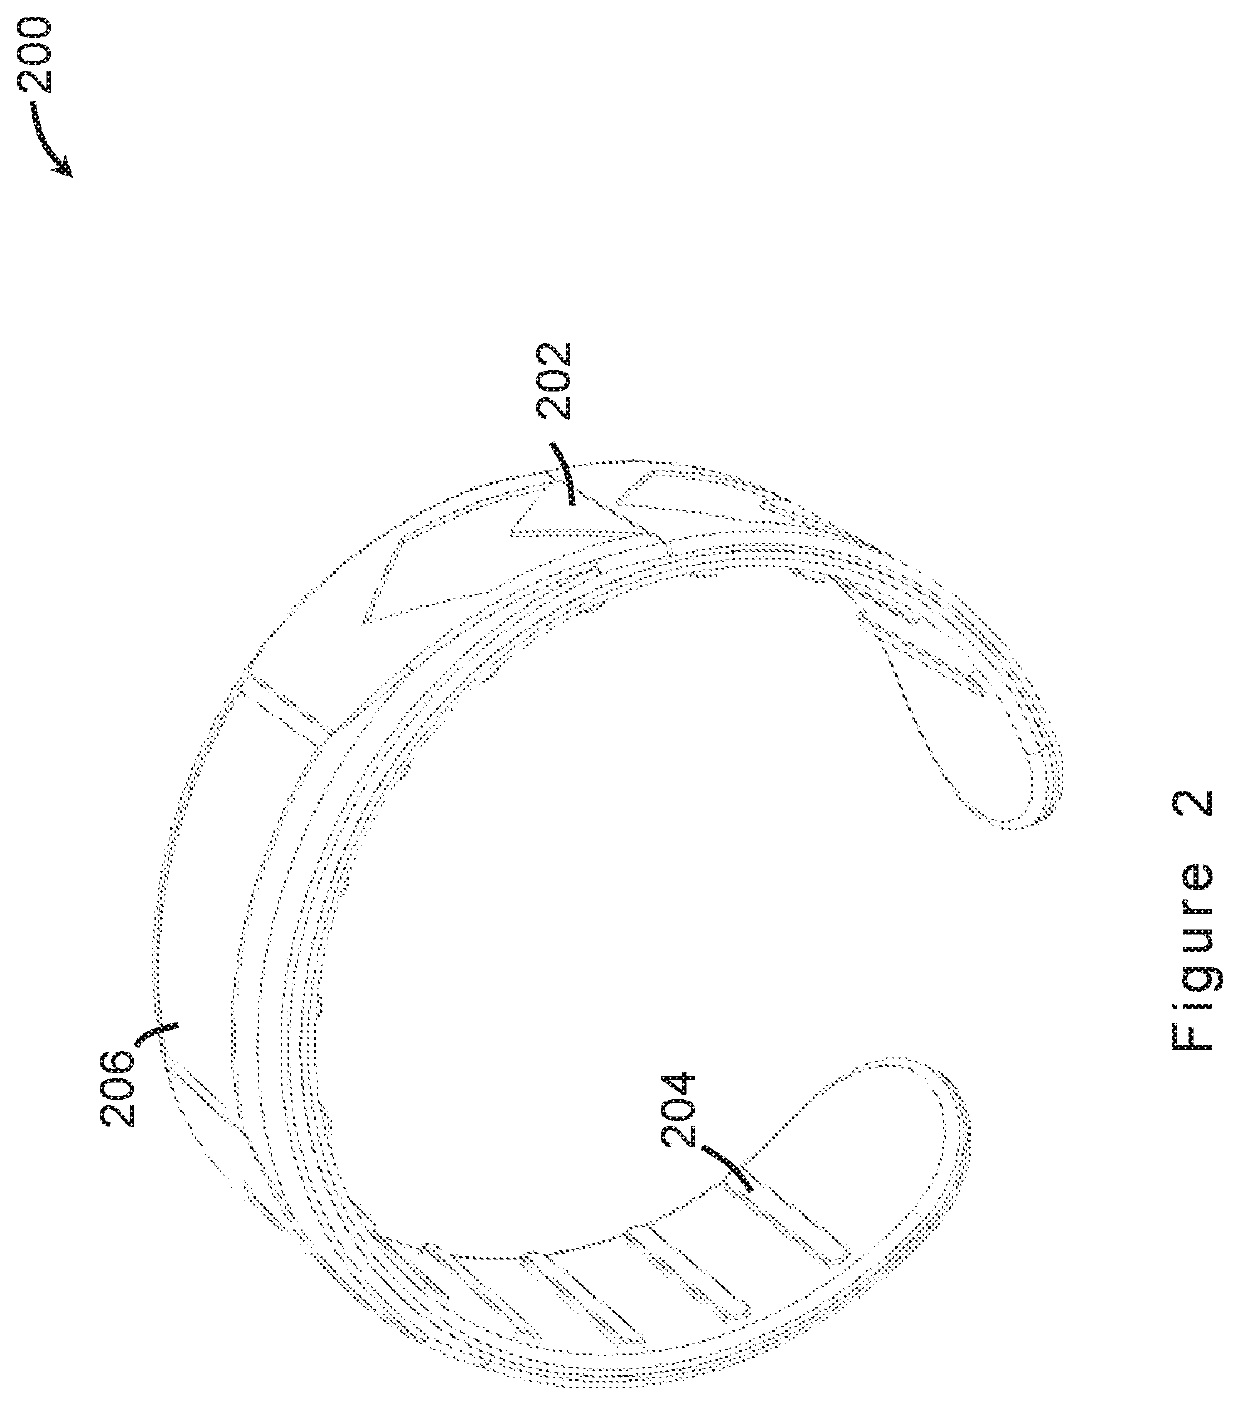 Wearable gesture recognition device and associated operation method and system